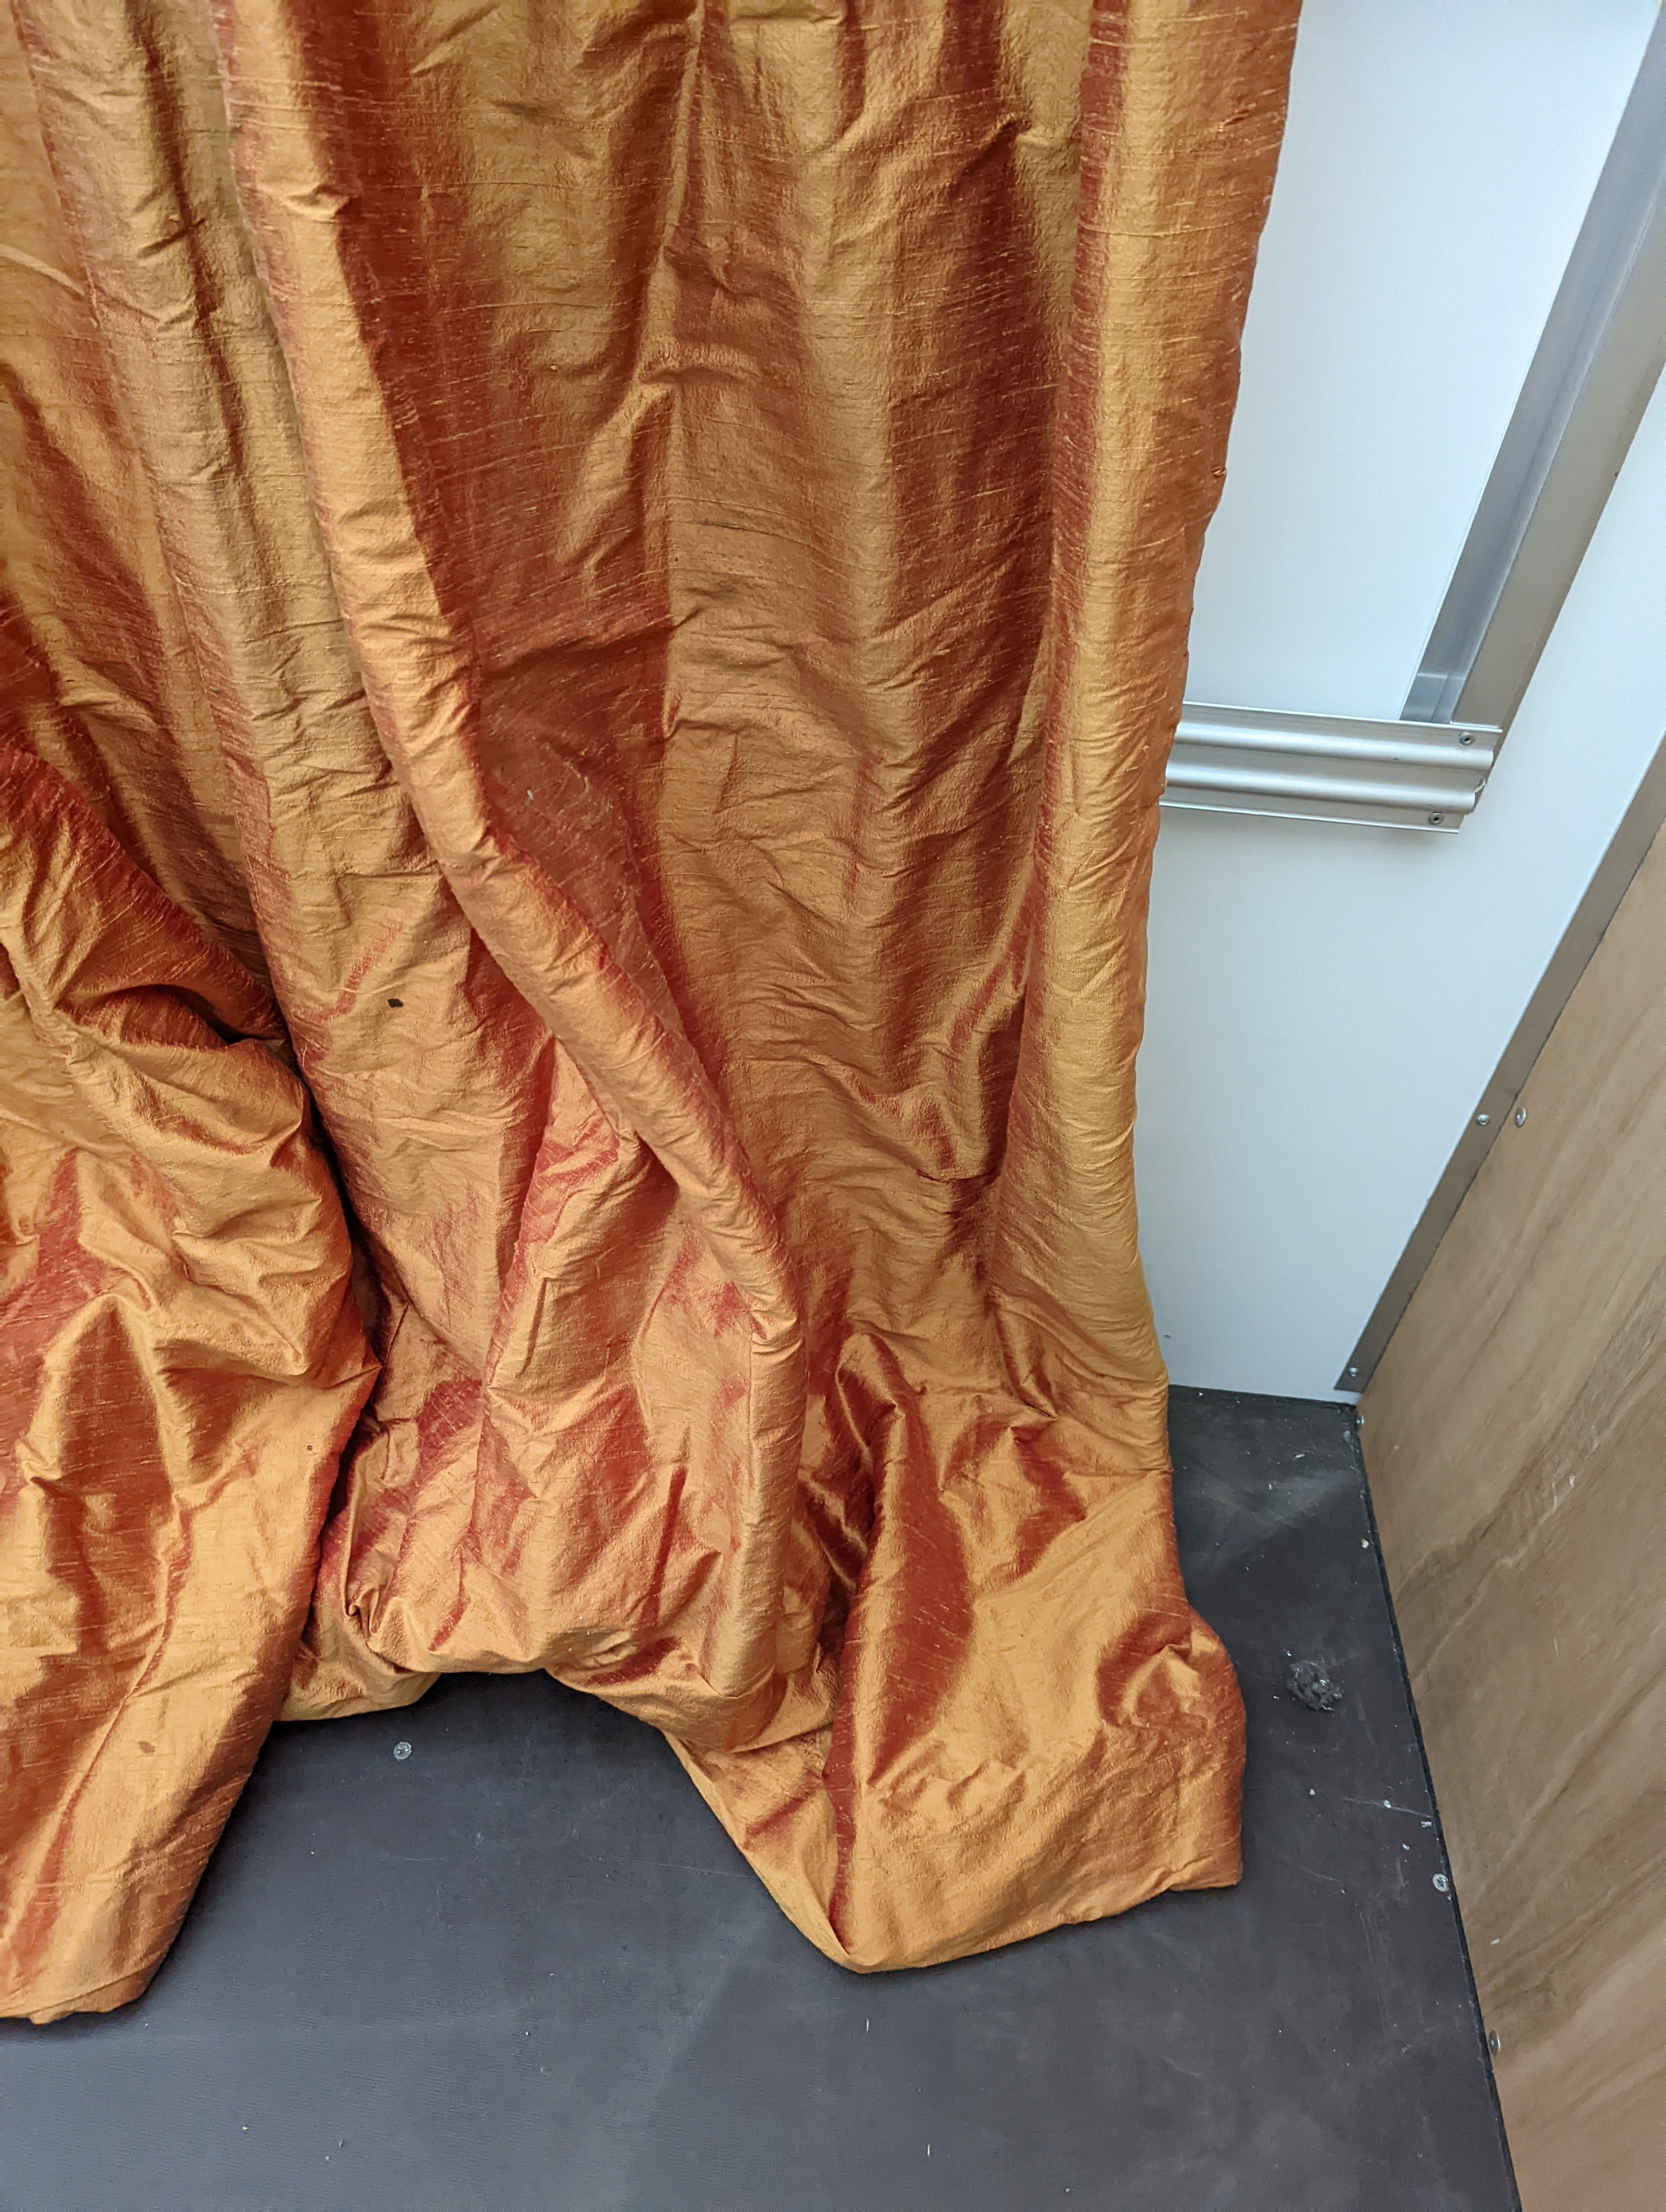 A pair of orange lined curtains. Approximate measurements: Width of top 180cm, Width of bottom 320cm Length 250cm